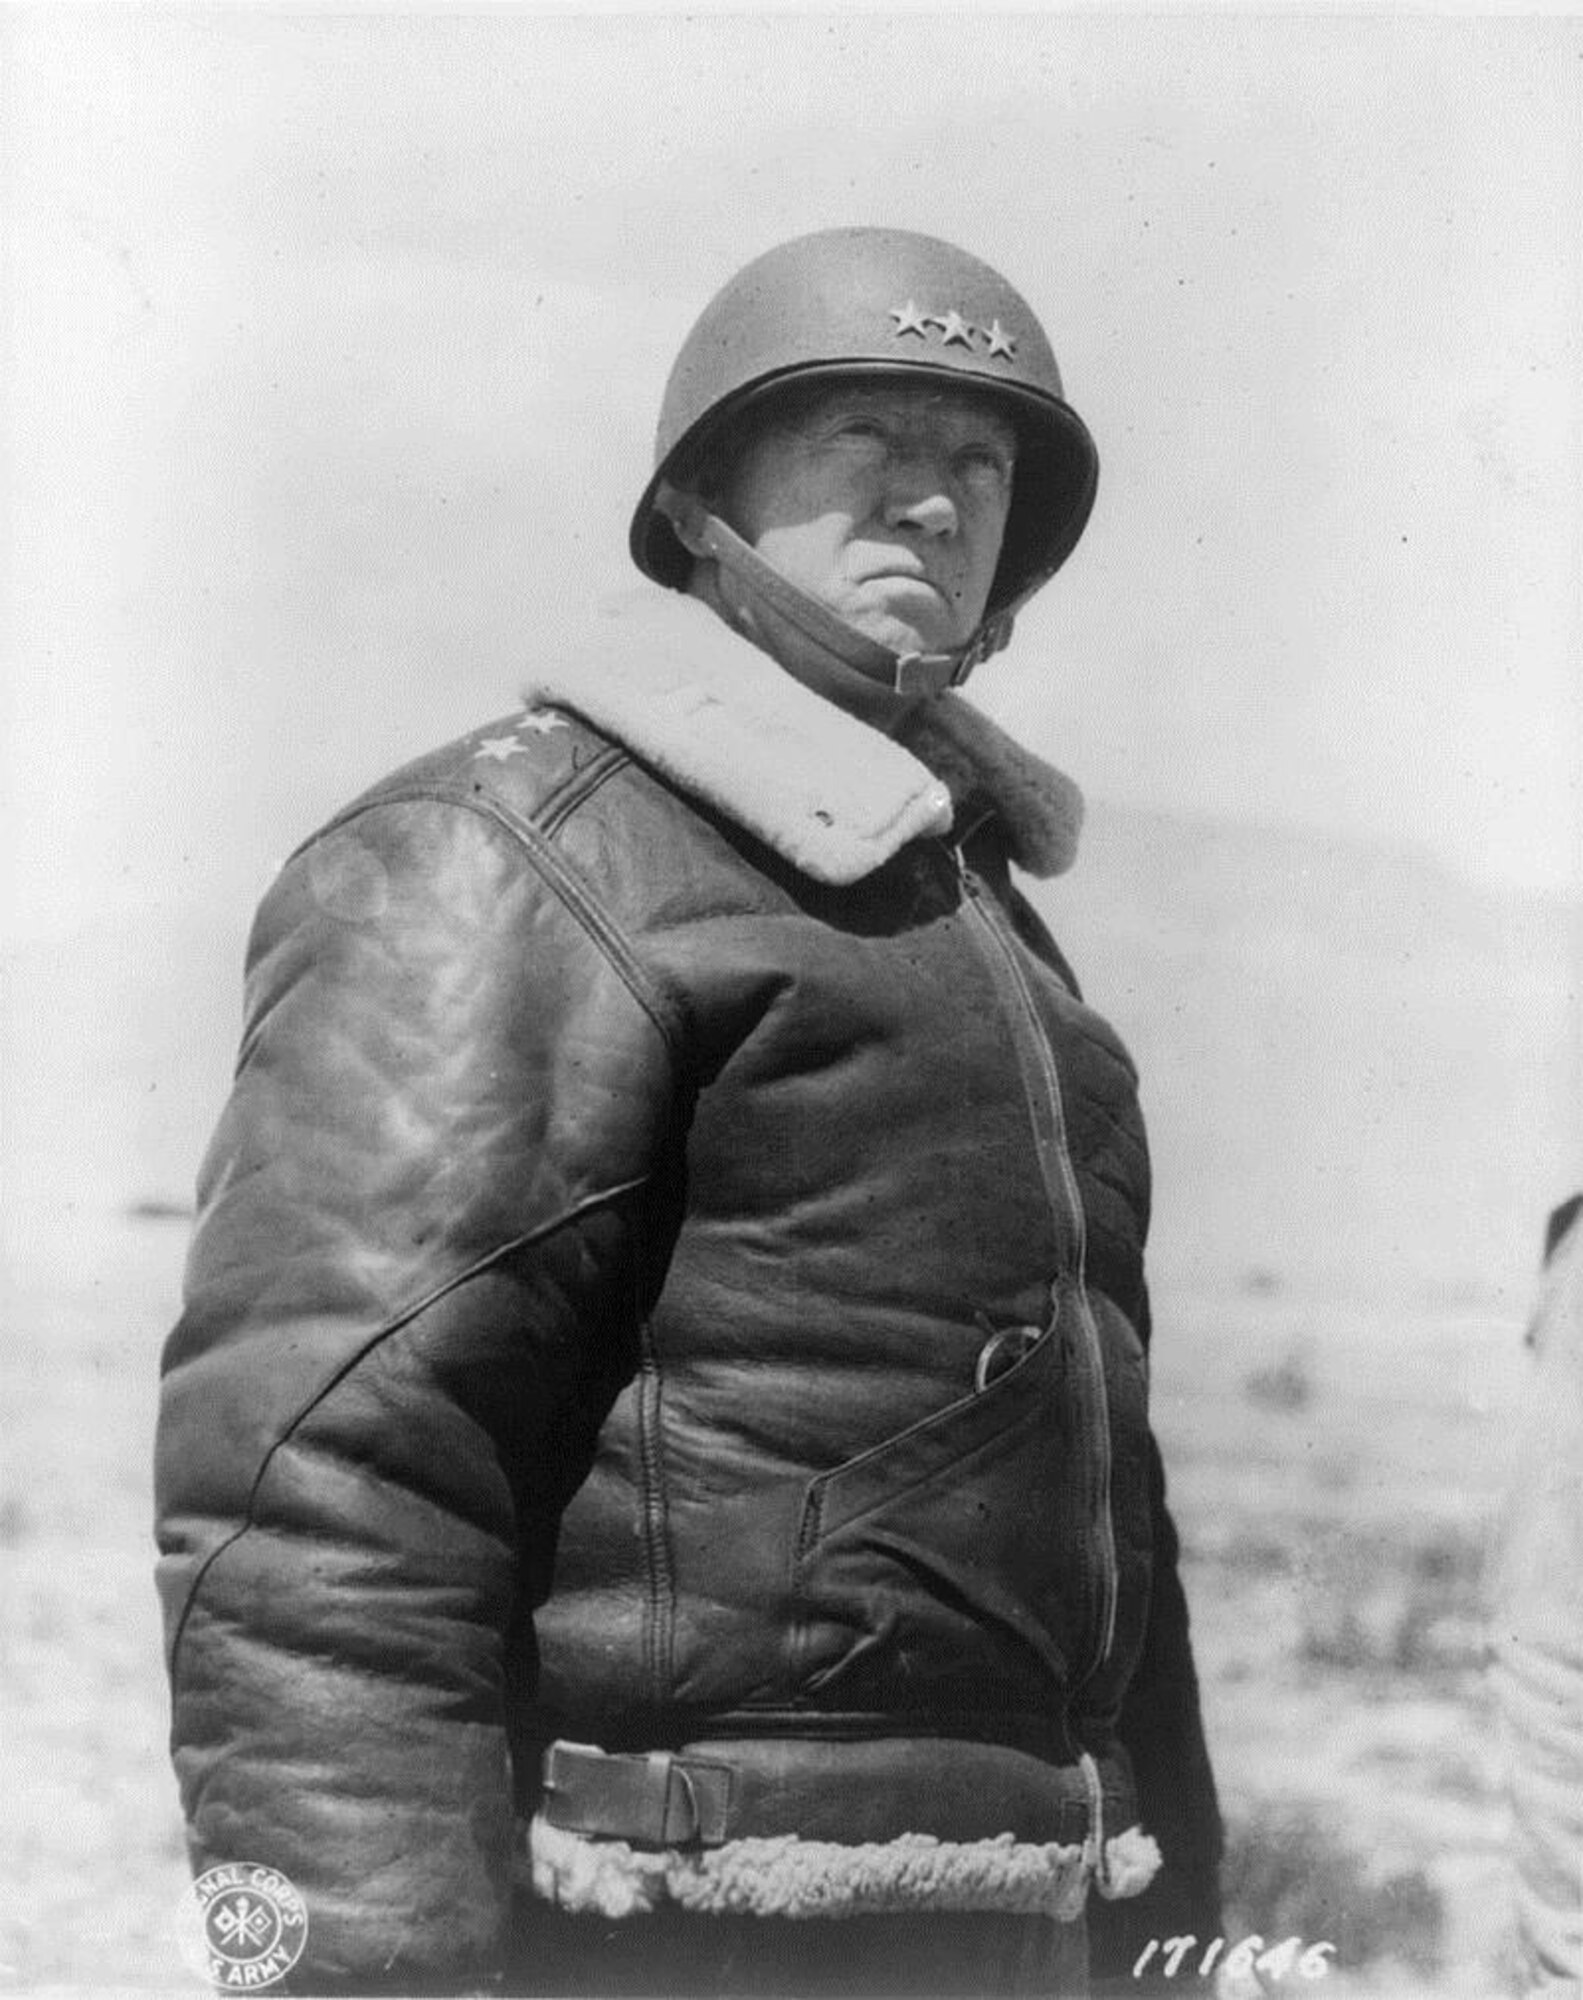 Lieutenant General George S. Patton, Jr., US Army, commanded Third Army in the breakout from Normandy, across France and into Germany in 1944-1945.  (US Army)